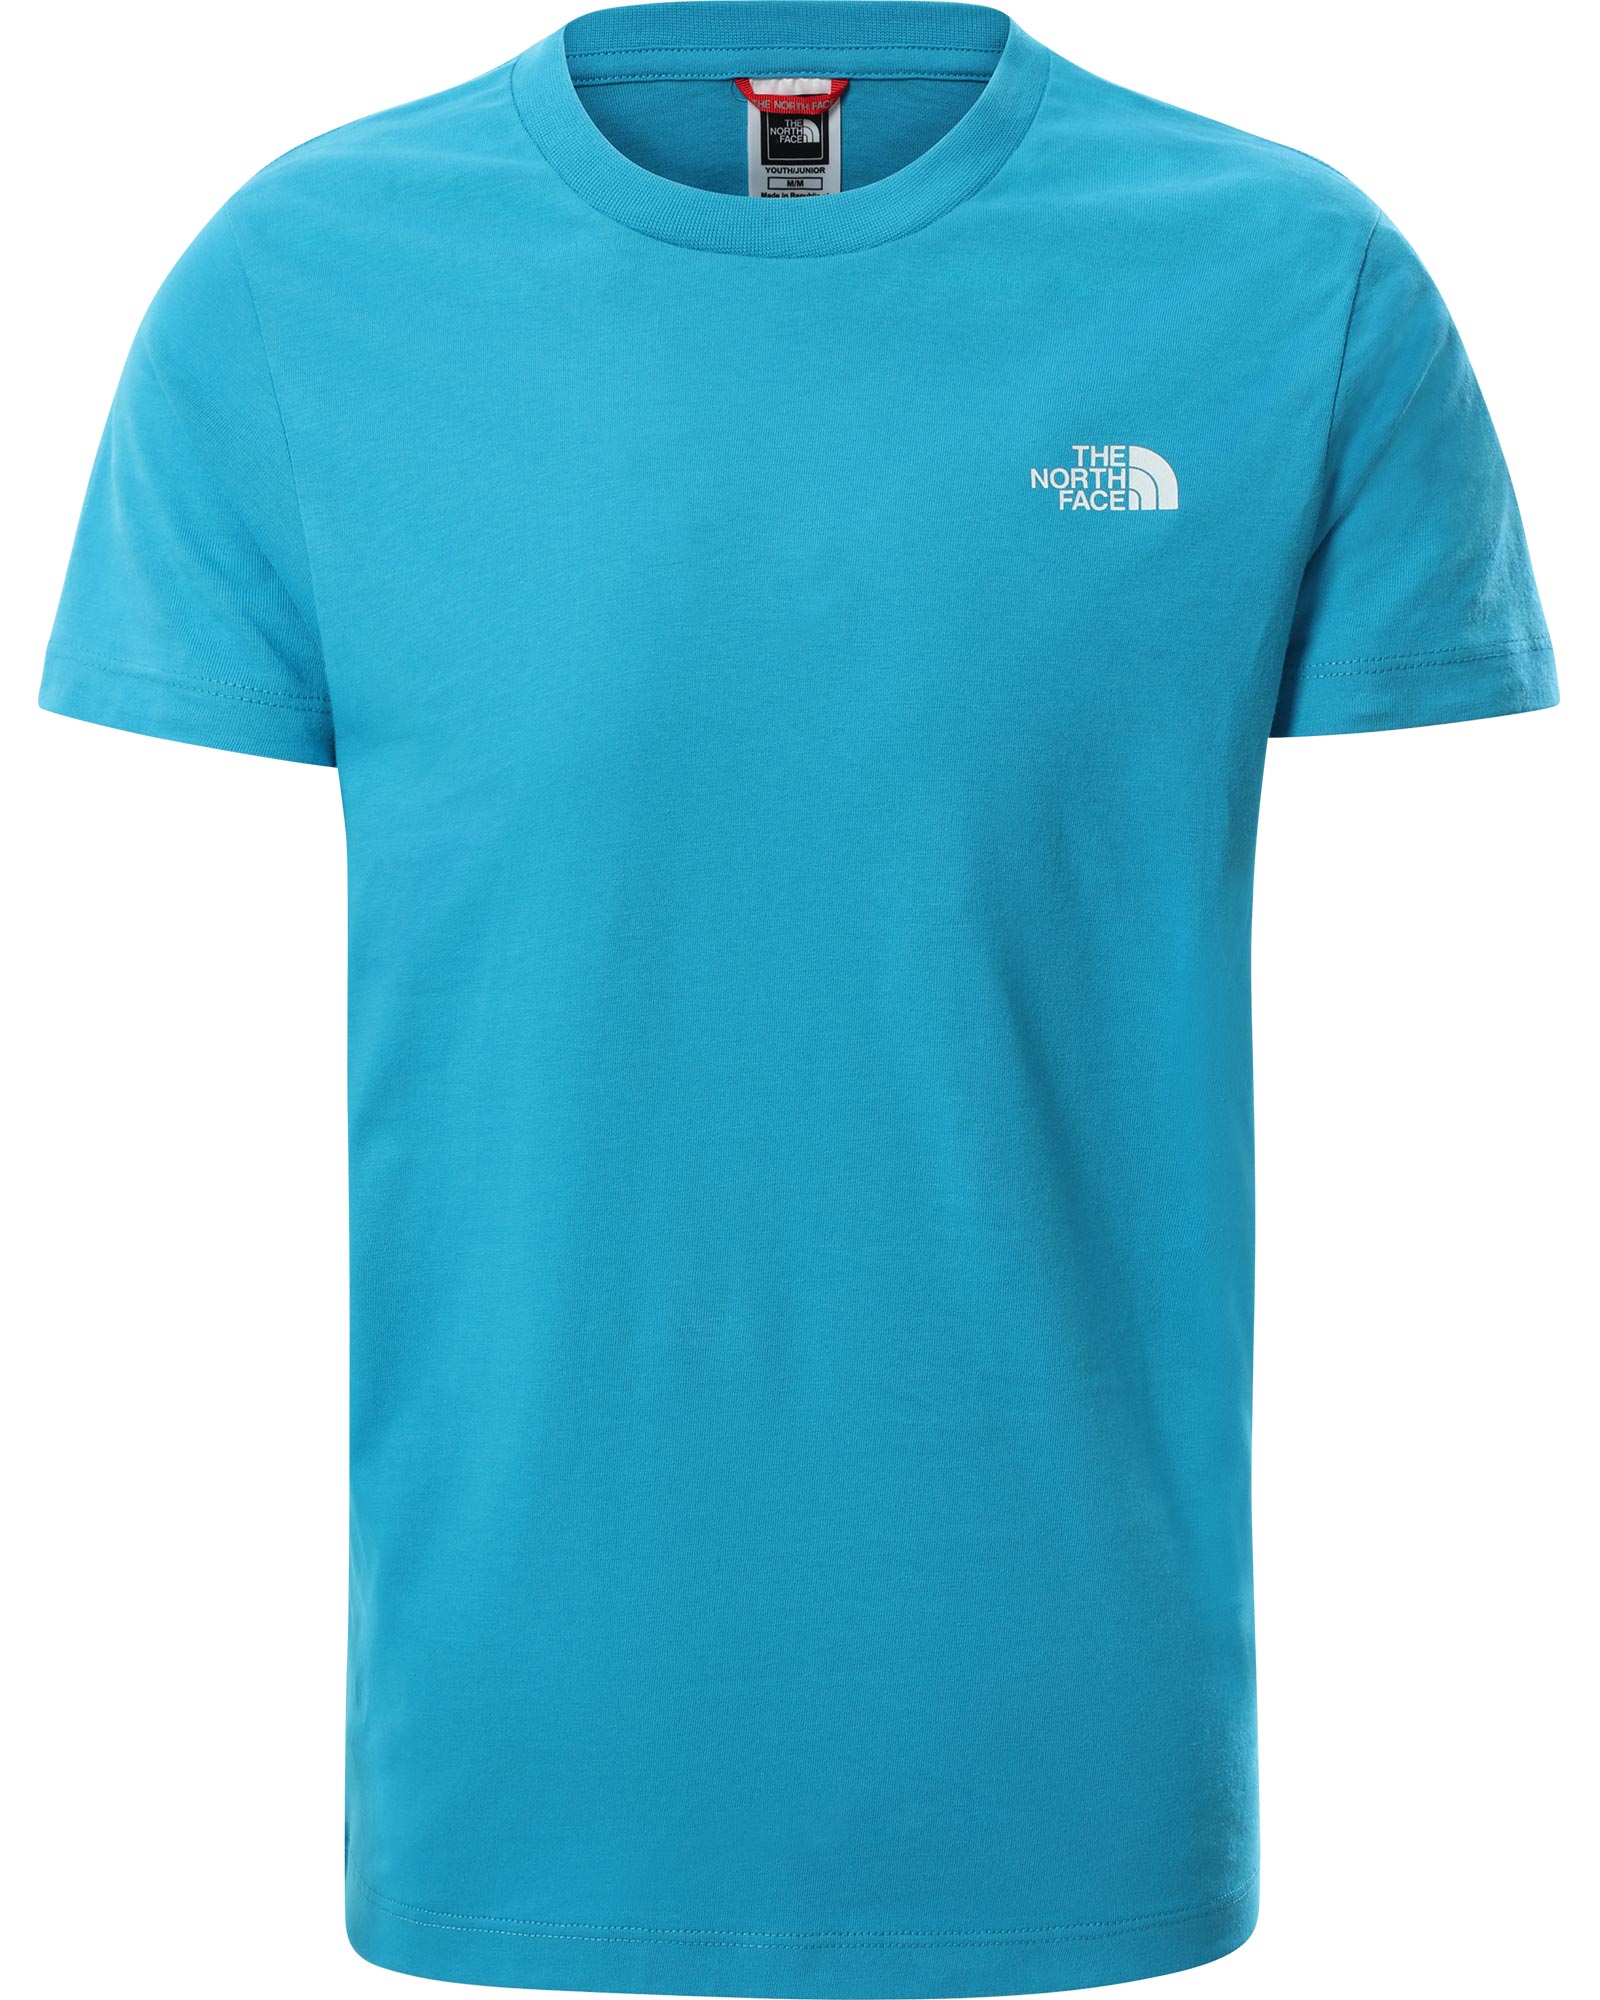 The North Face Simple Dome Kids T-shirt Xl